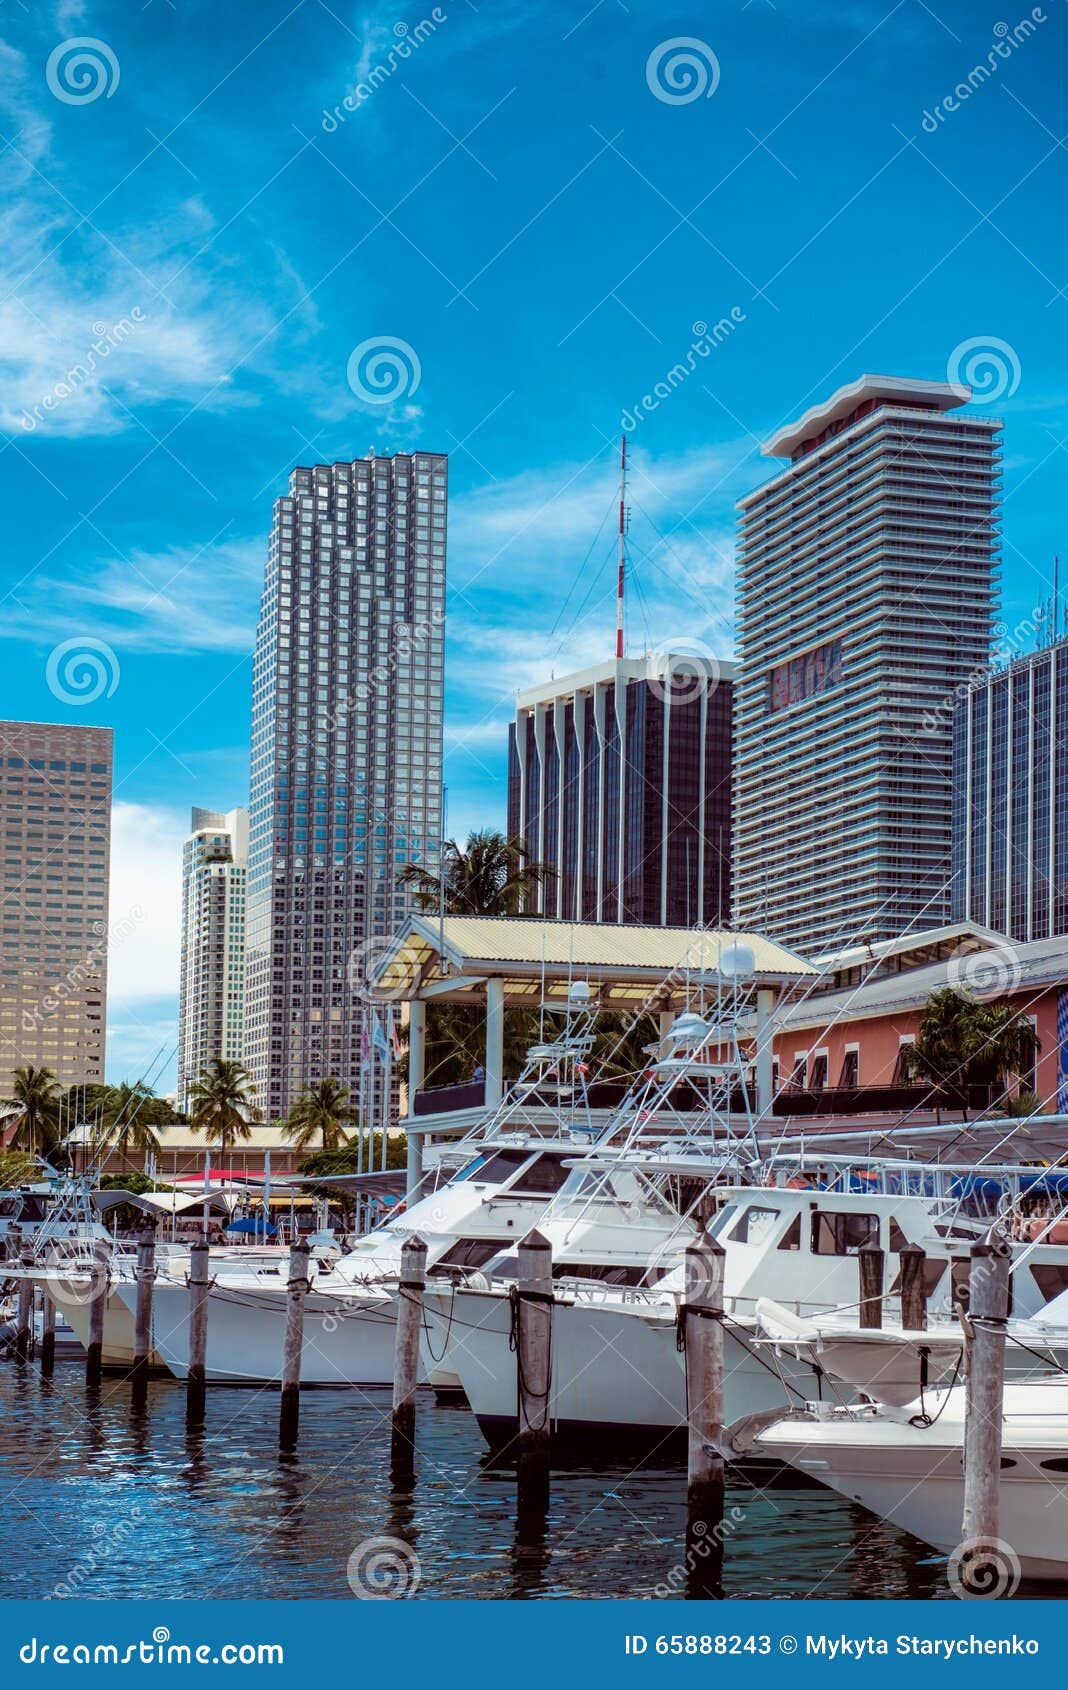 luxury yachts and skyscrapers at the bayside marina in miami